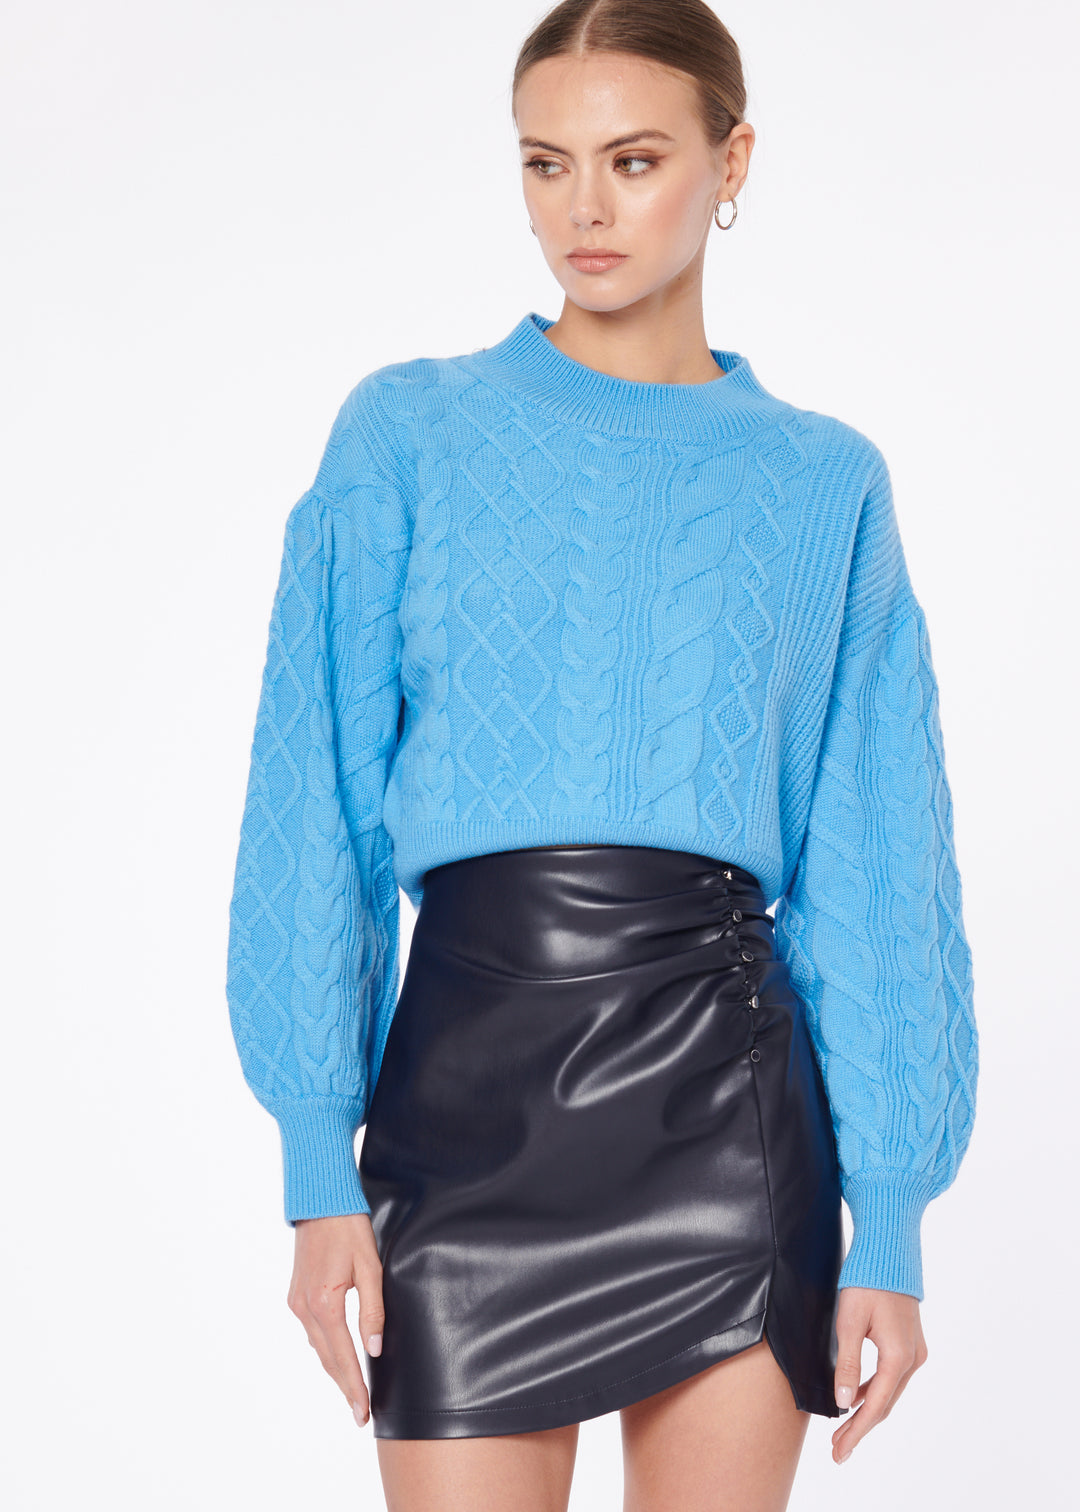 Cami Nyc - Davney Sweater In Electric Blue